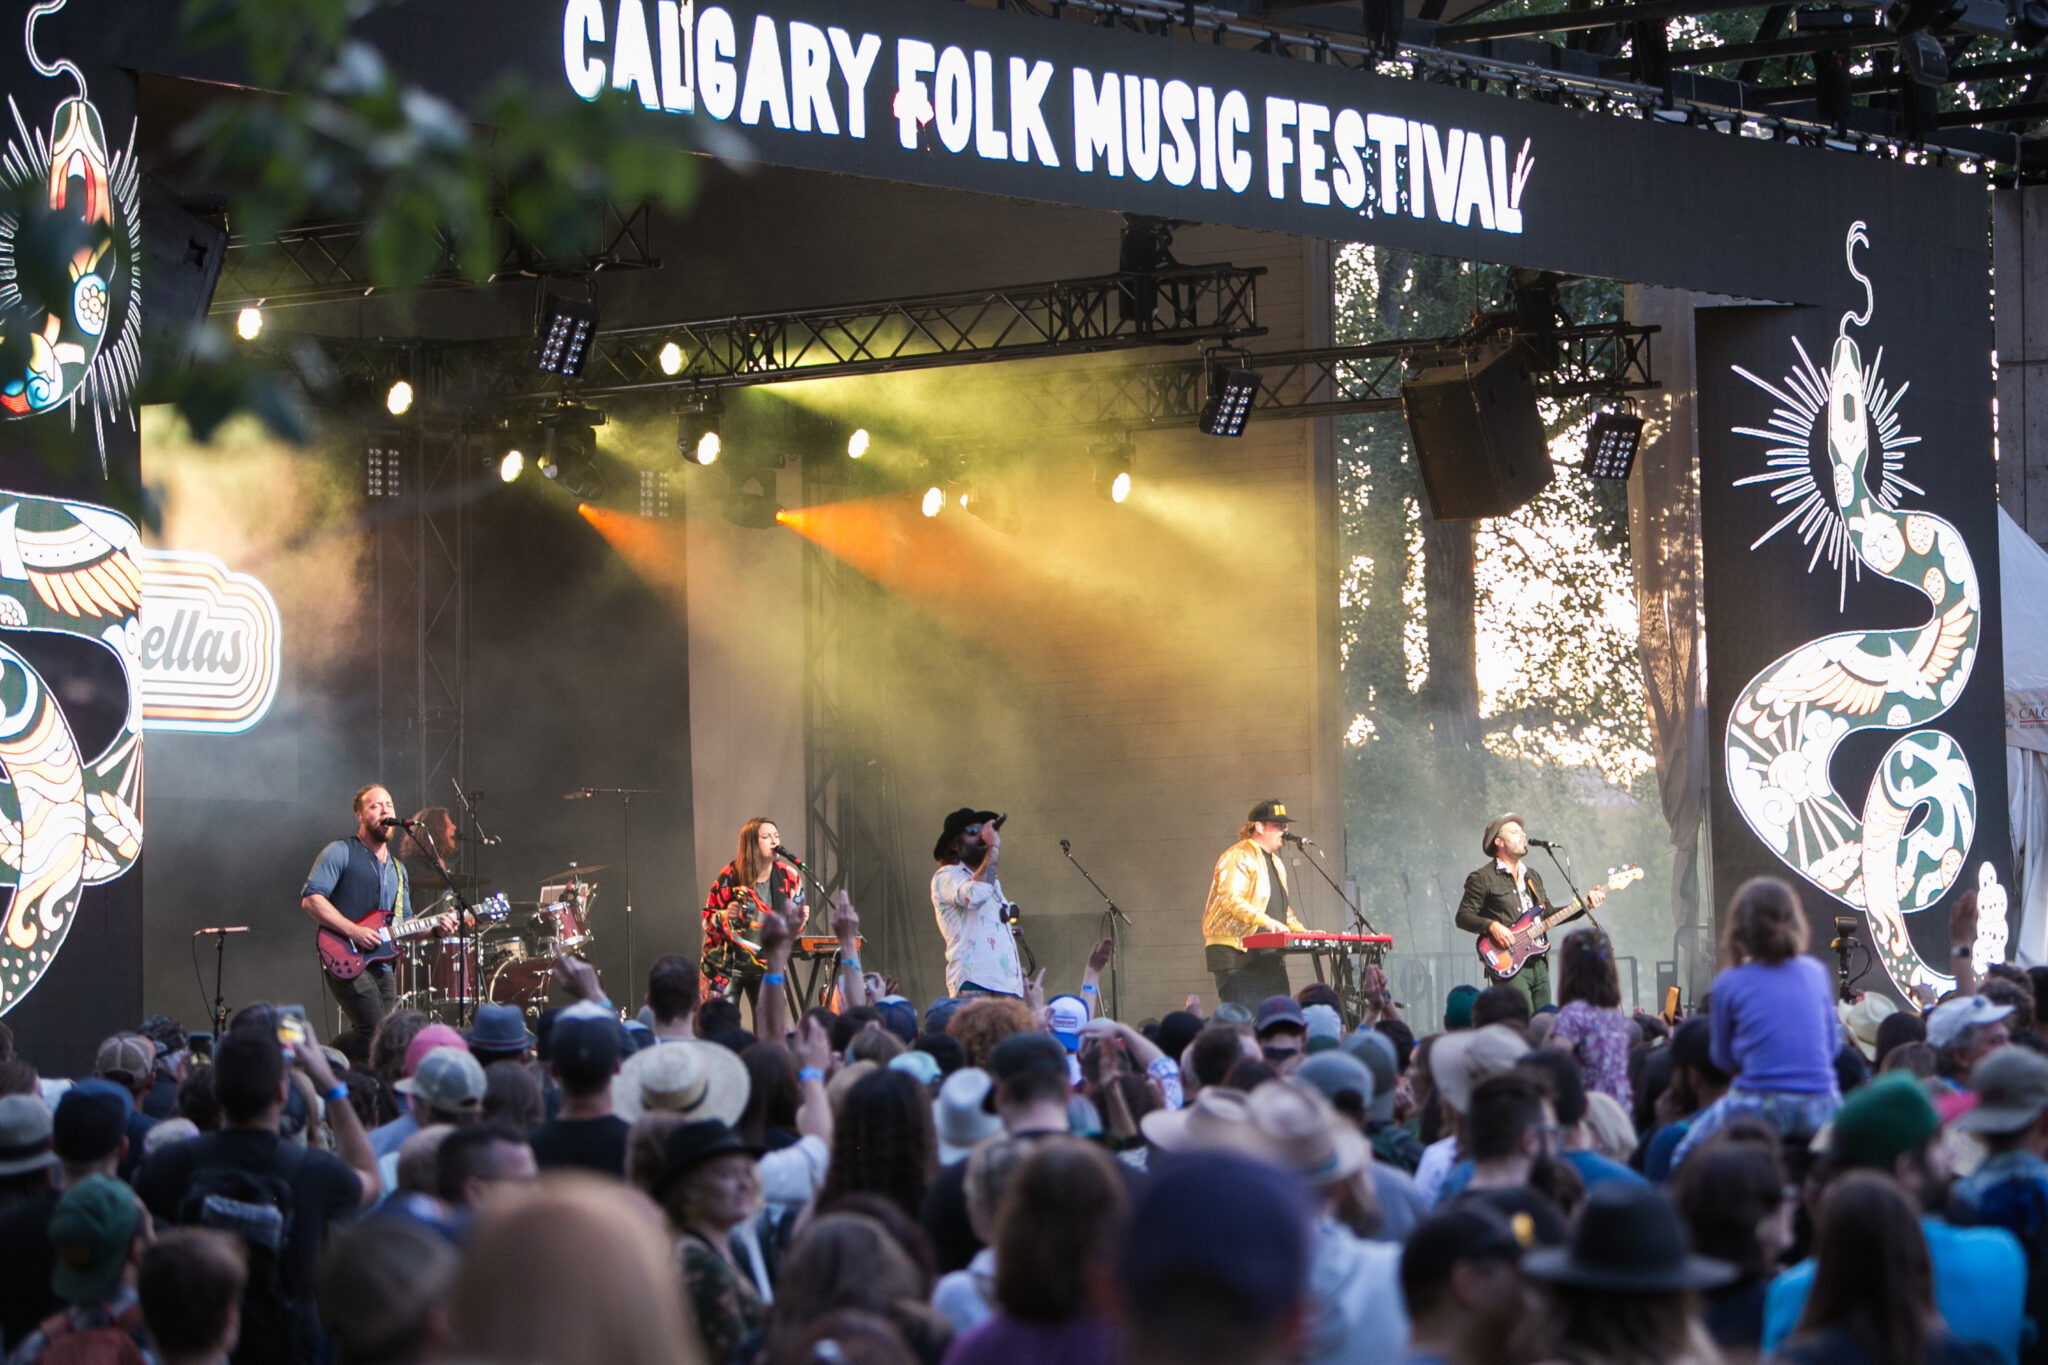 16-facts-about-calgary-folk-music-festival